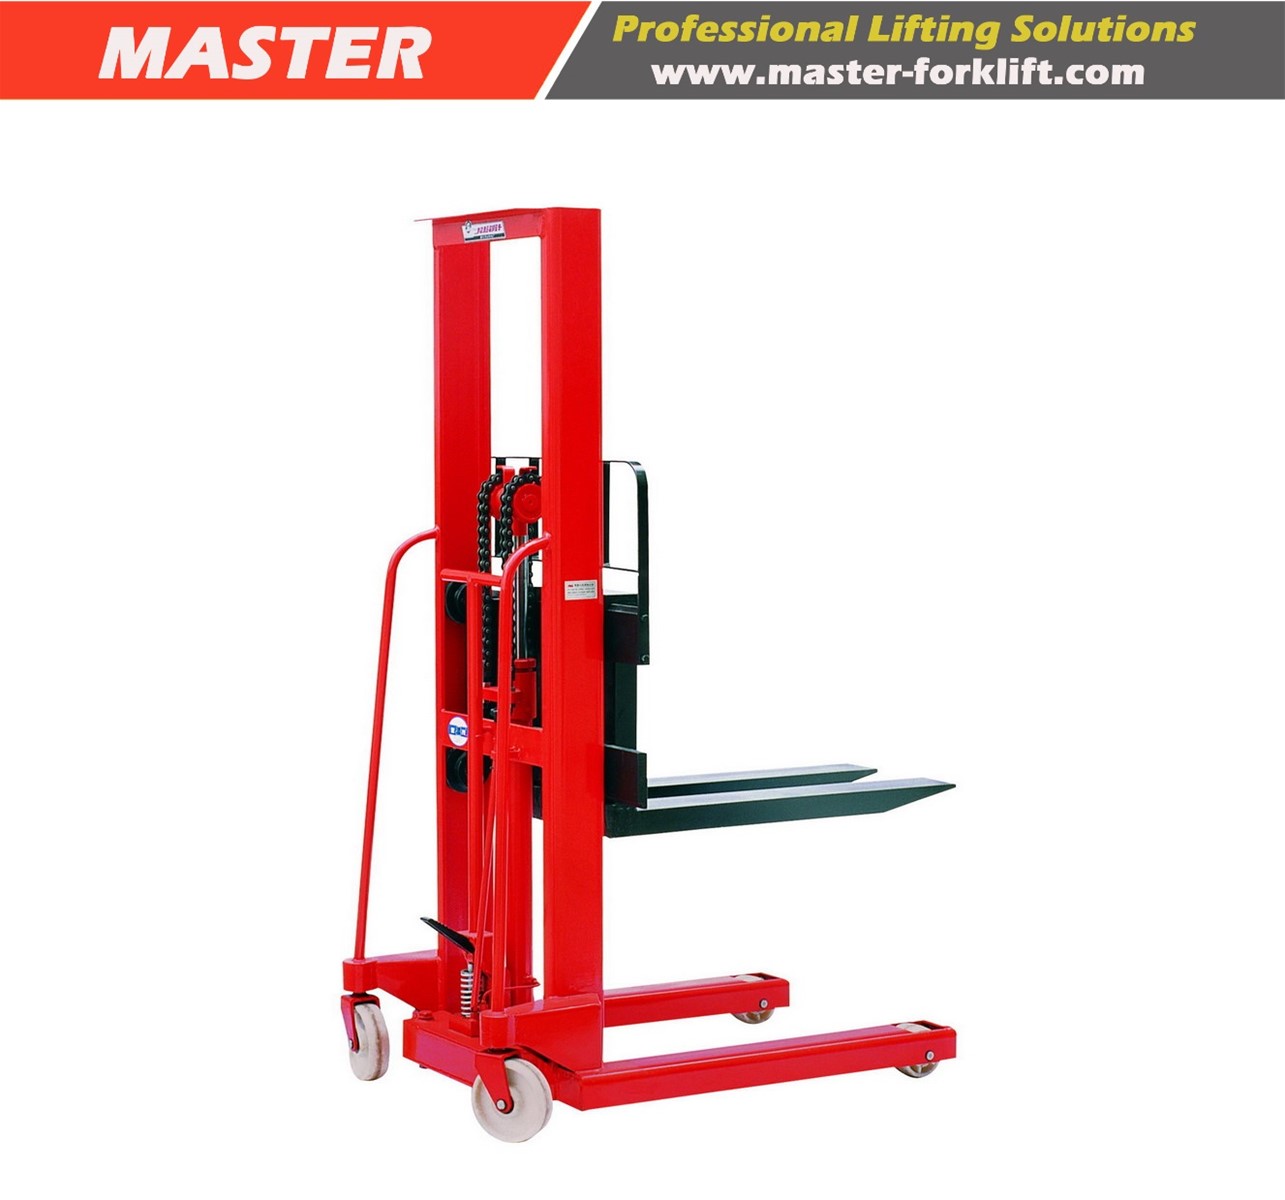 Master Forklift 0 5 2 0 Ton Manual Stacker From China Manufacturer Manufactory Factory And Supplier On Ecvv Com